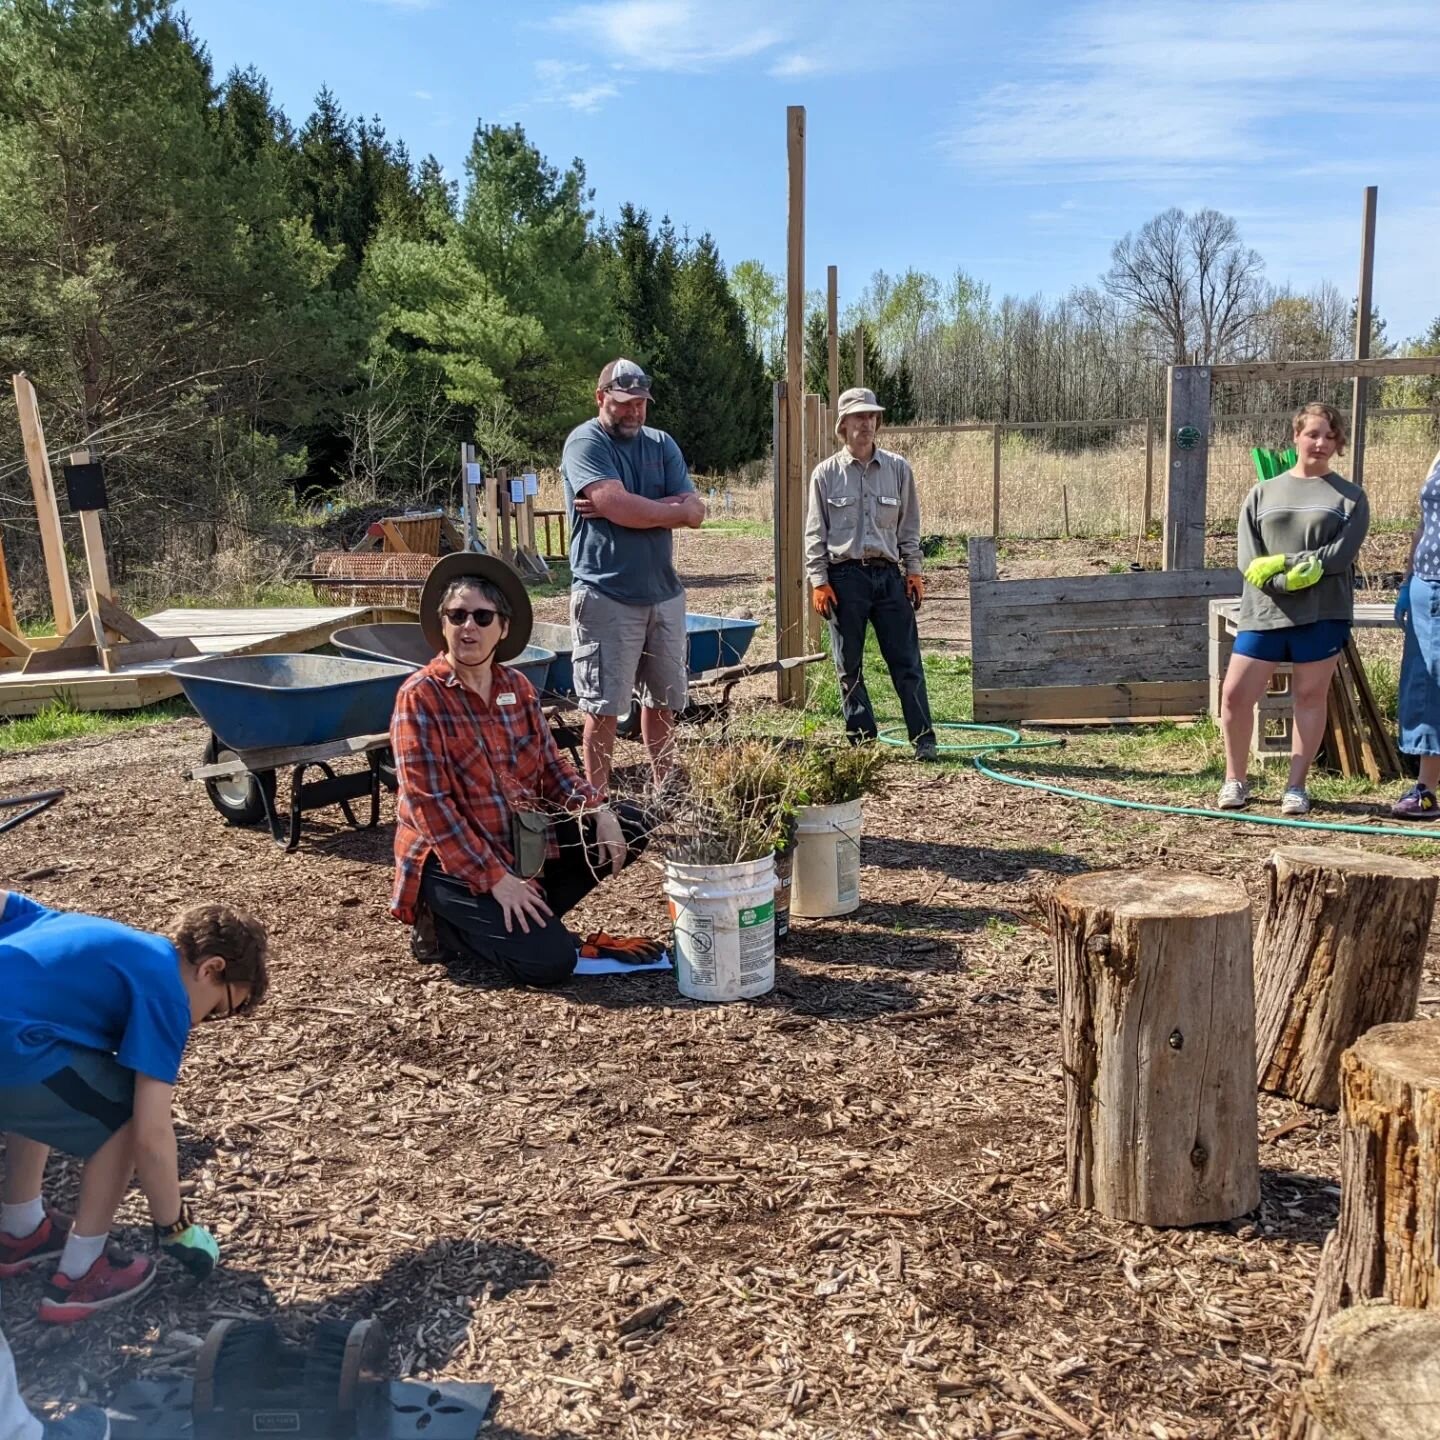 We planted over 100 trees in two hours with the Habitat Healers at @crossroadsatbigcreek on Saturday. Taking action on climate change is a collaborative effort 🤝